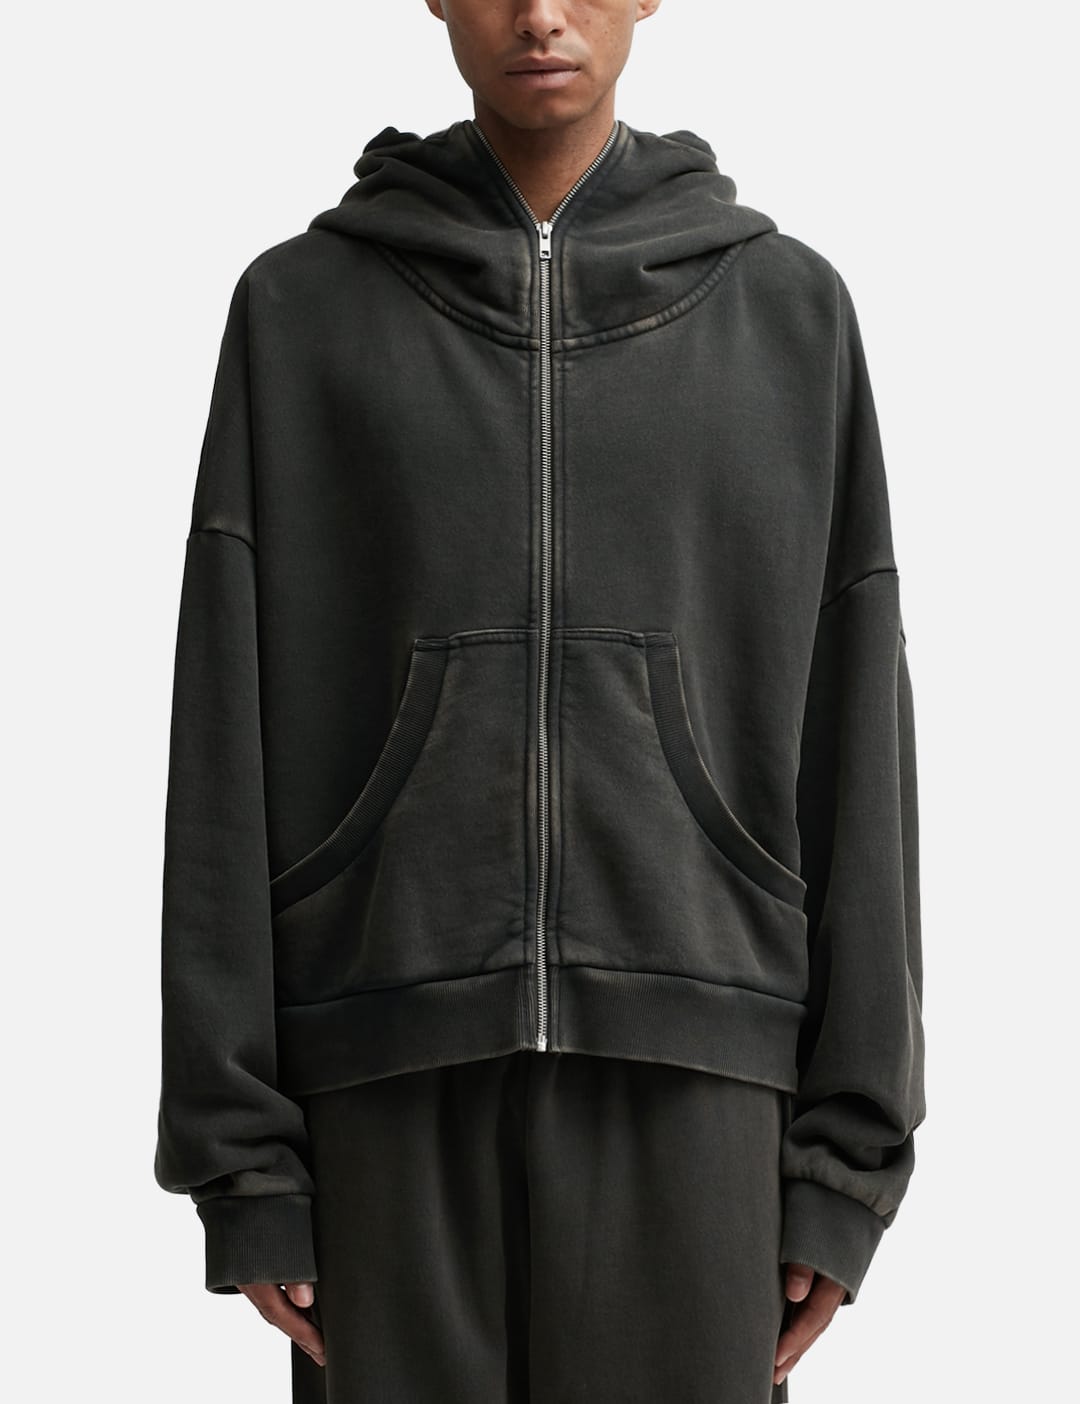 Entire Studios - Full Zip Hoodie | HBX - Globally Curated Fashion